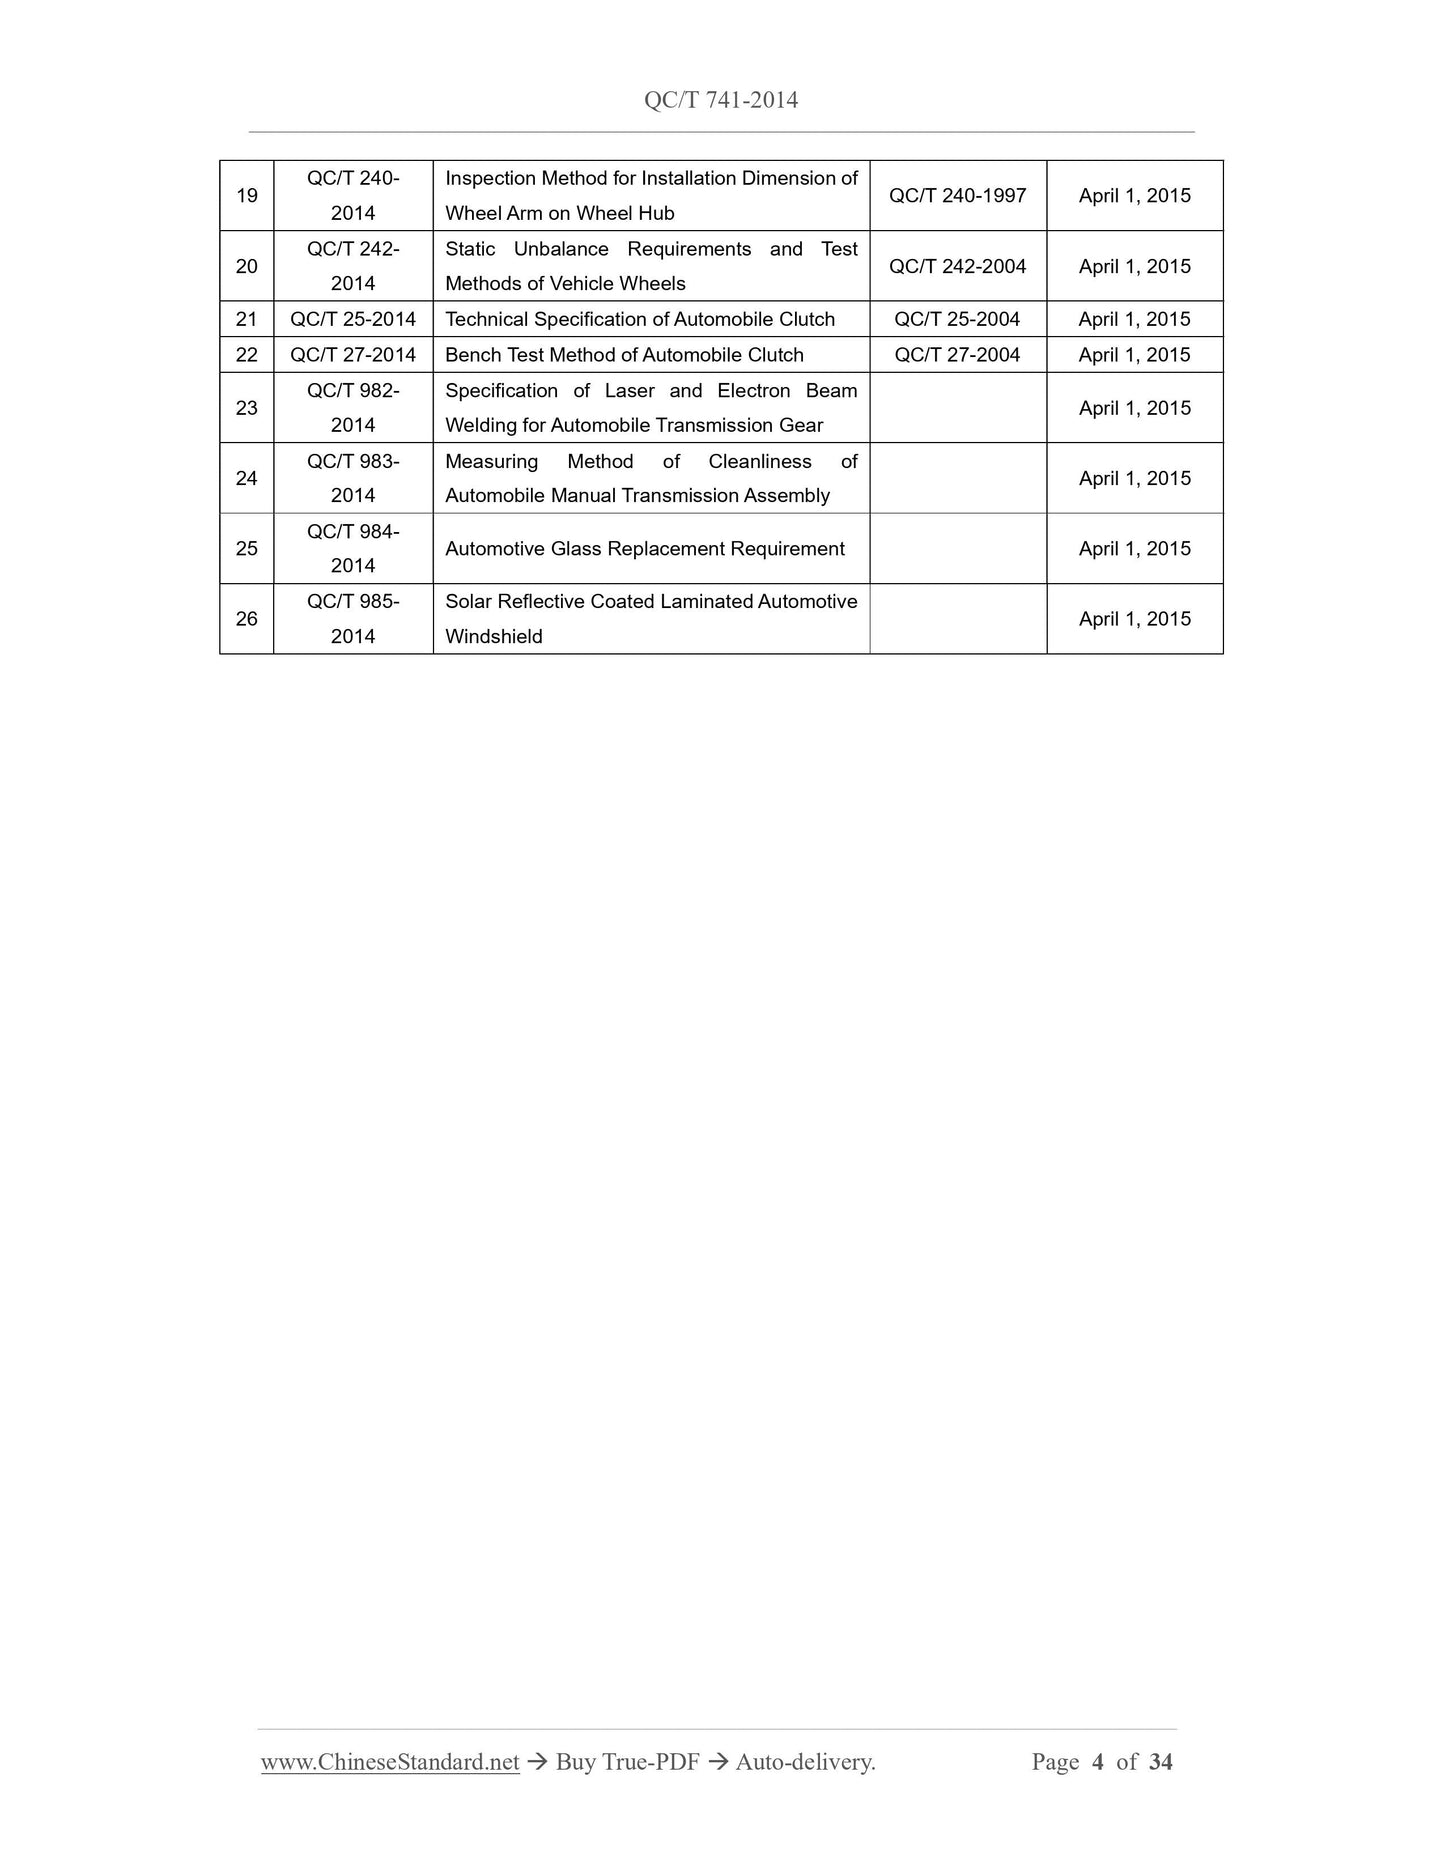 QC/T 741-2014 Page 4